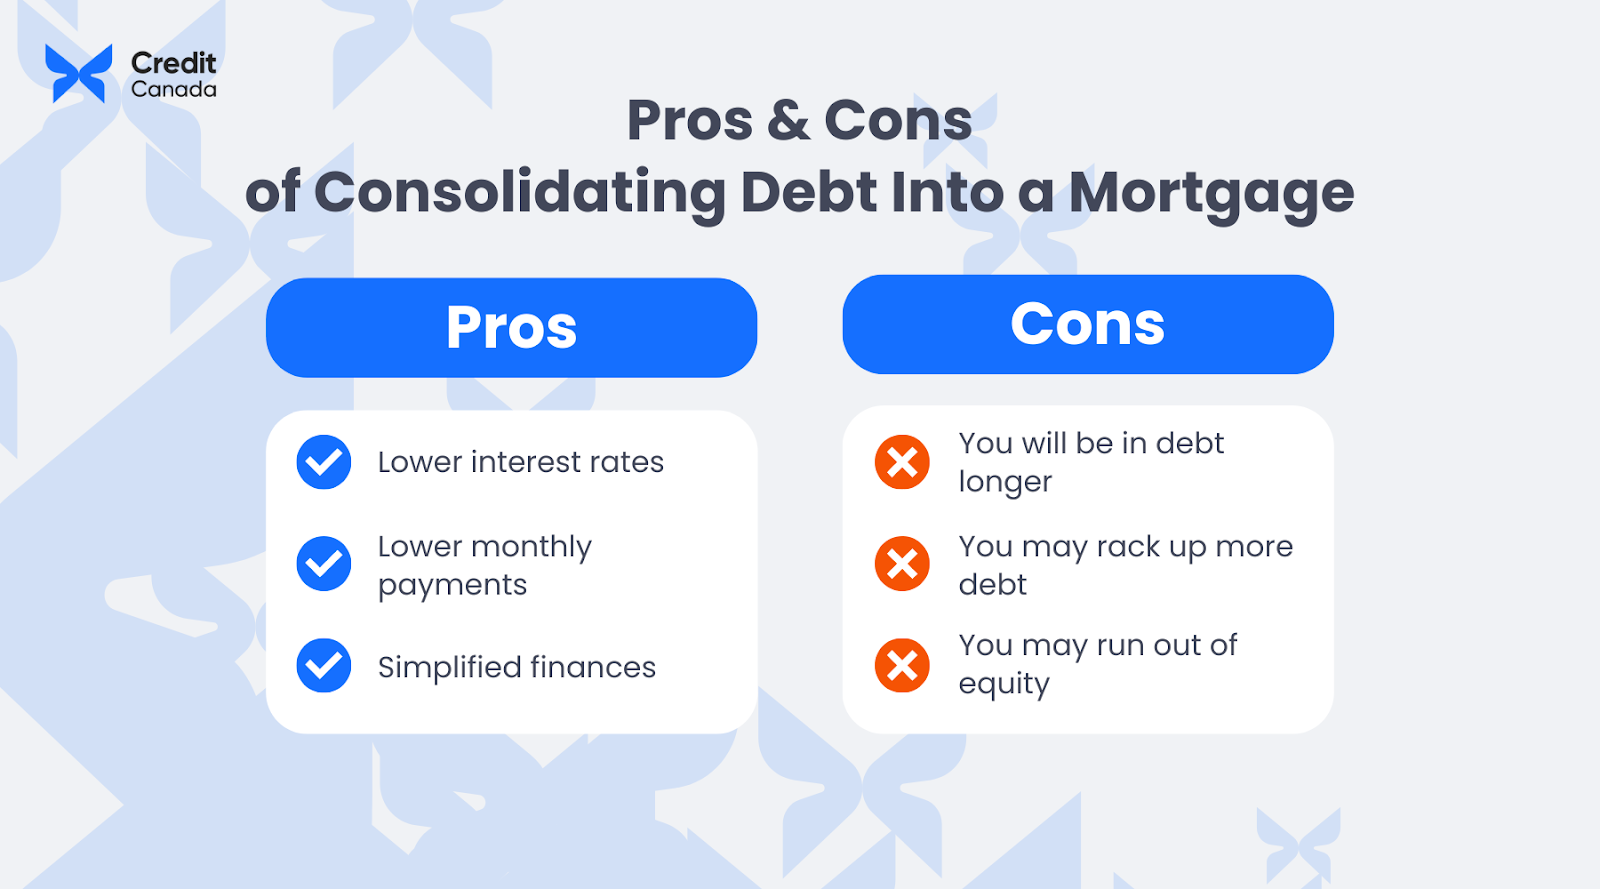 List of pros and cons of consolidating debt into a mortgage